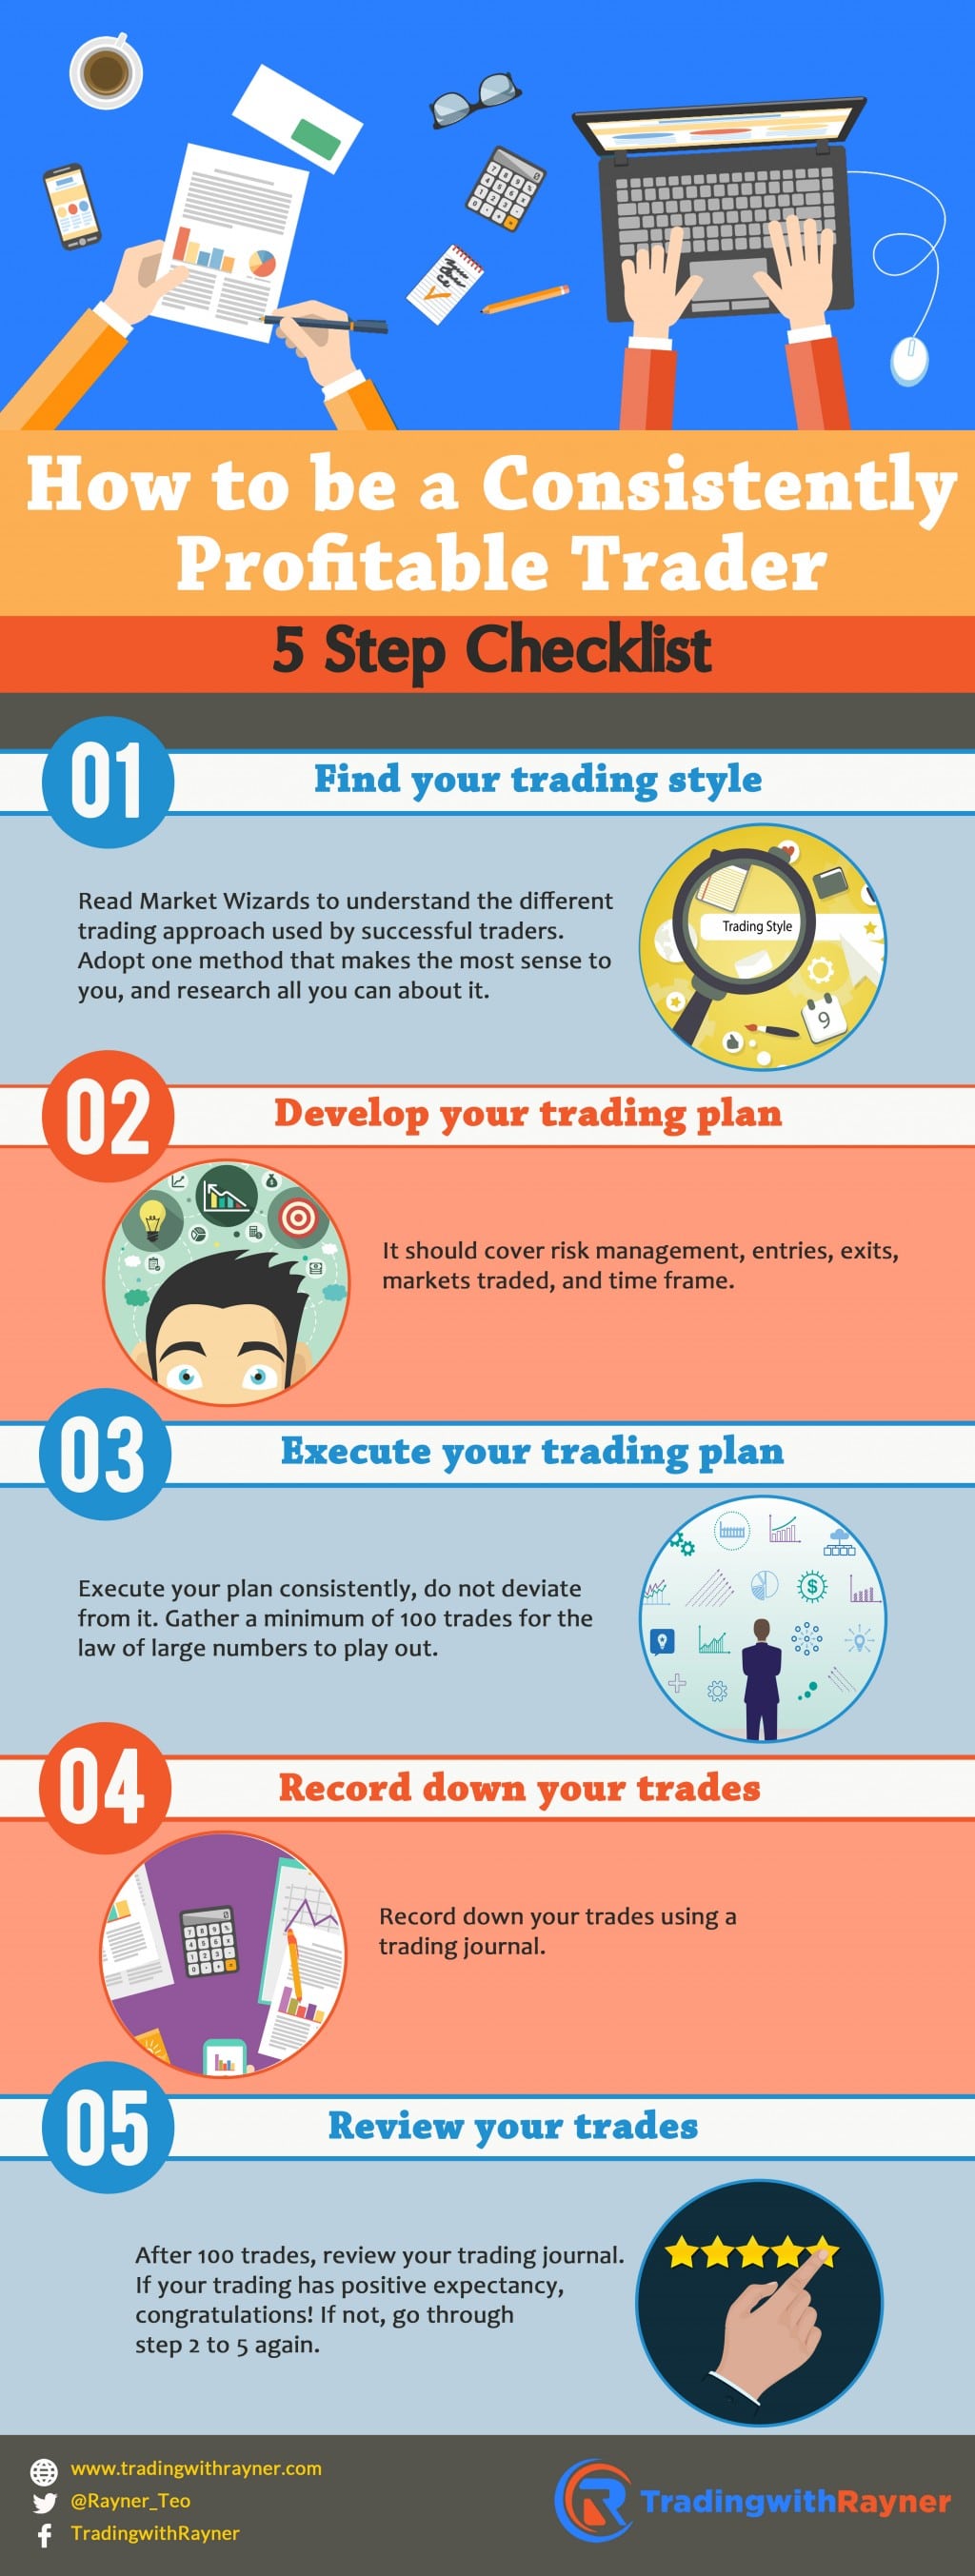 5 Step Checklist for Profitable Trading